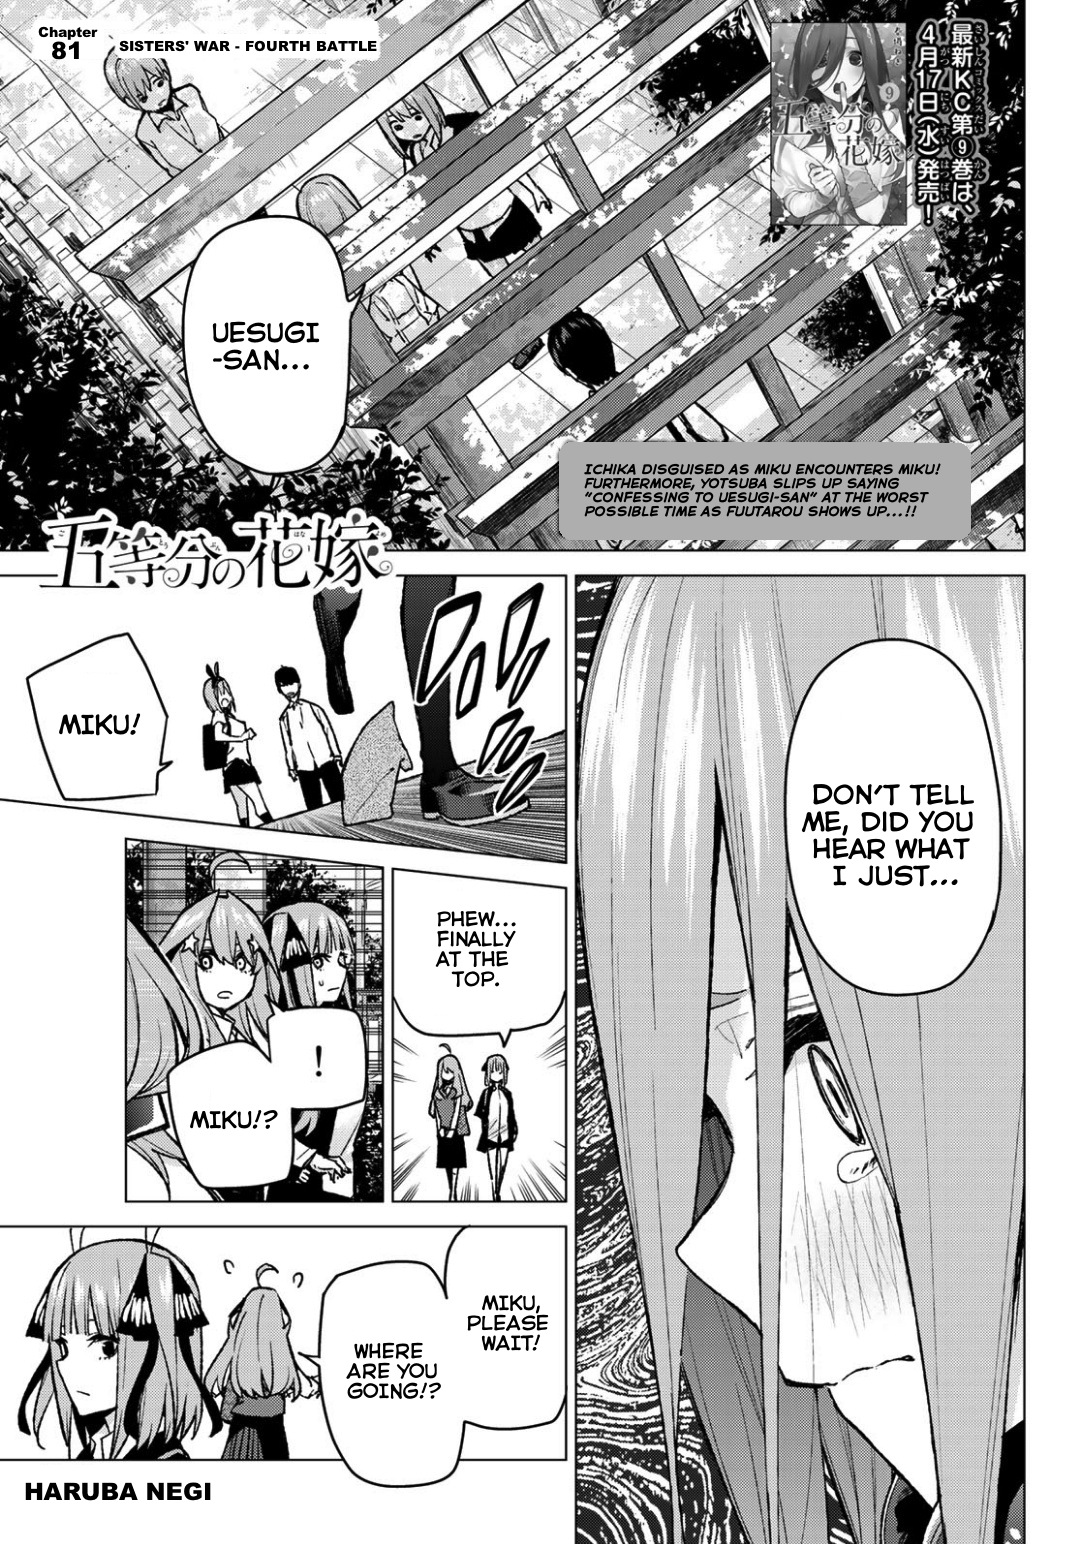 Go-Toubun No Hanayome Chapter 81: Sisters’ War - Fourth Battle - Picture 1